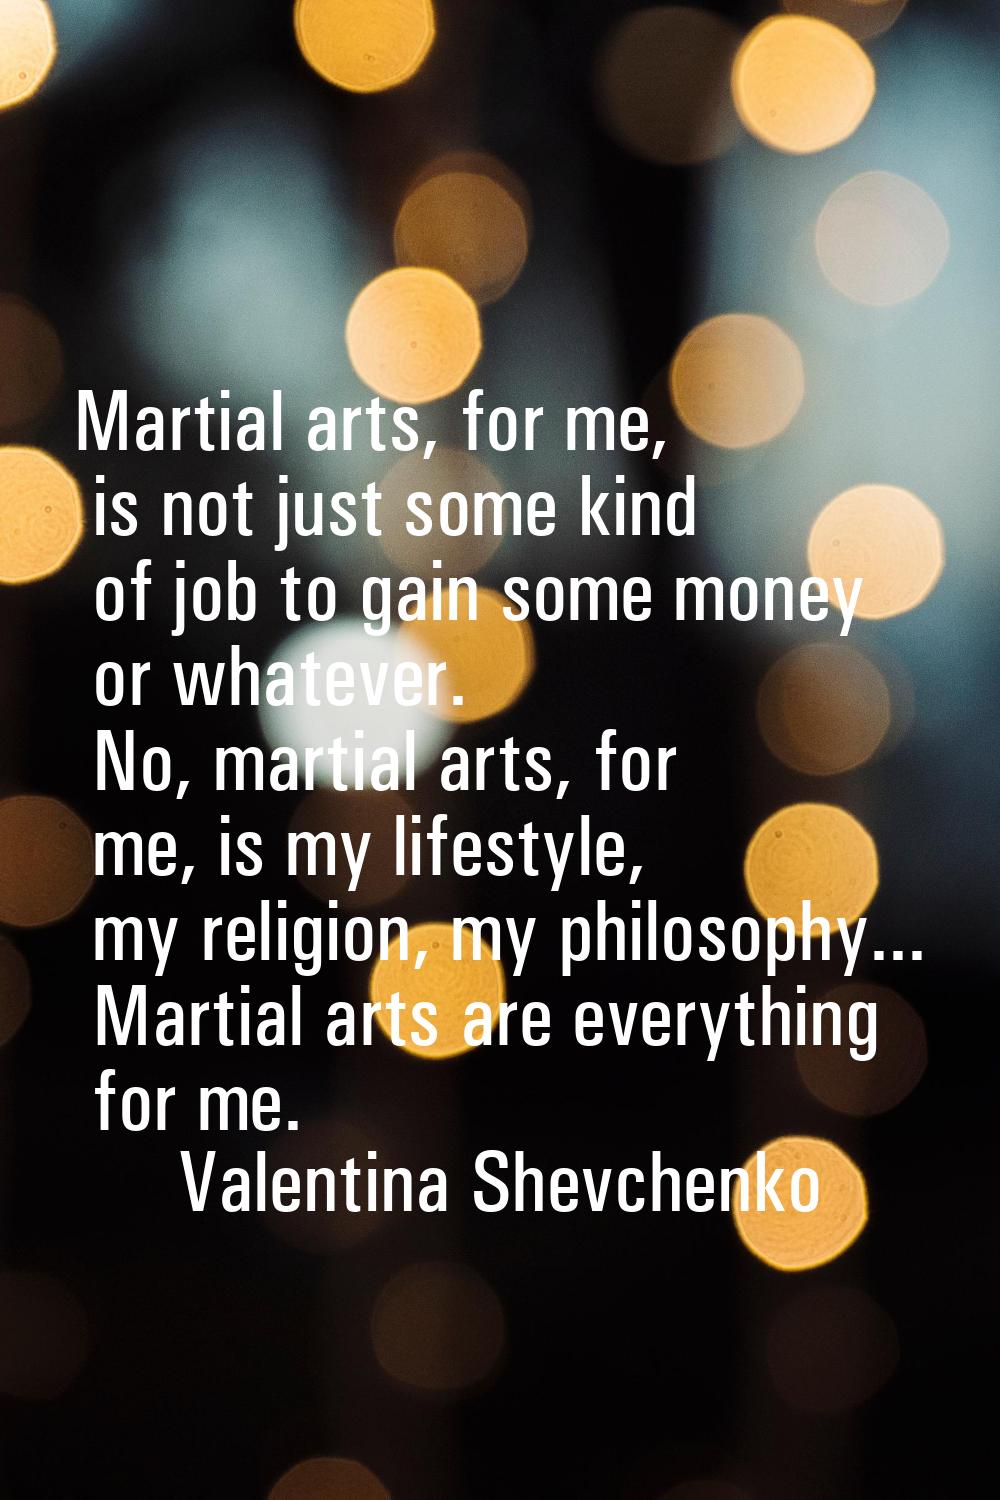 Martial arts, for me, is not just some kind of job to gain some money or whatever. No, martial arts